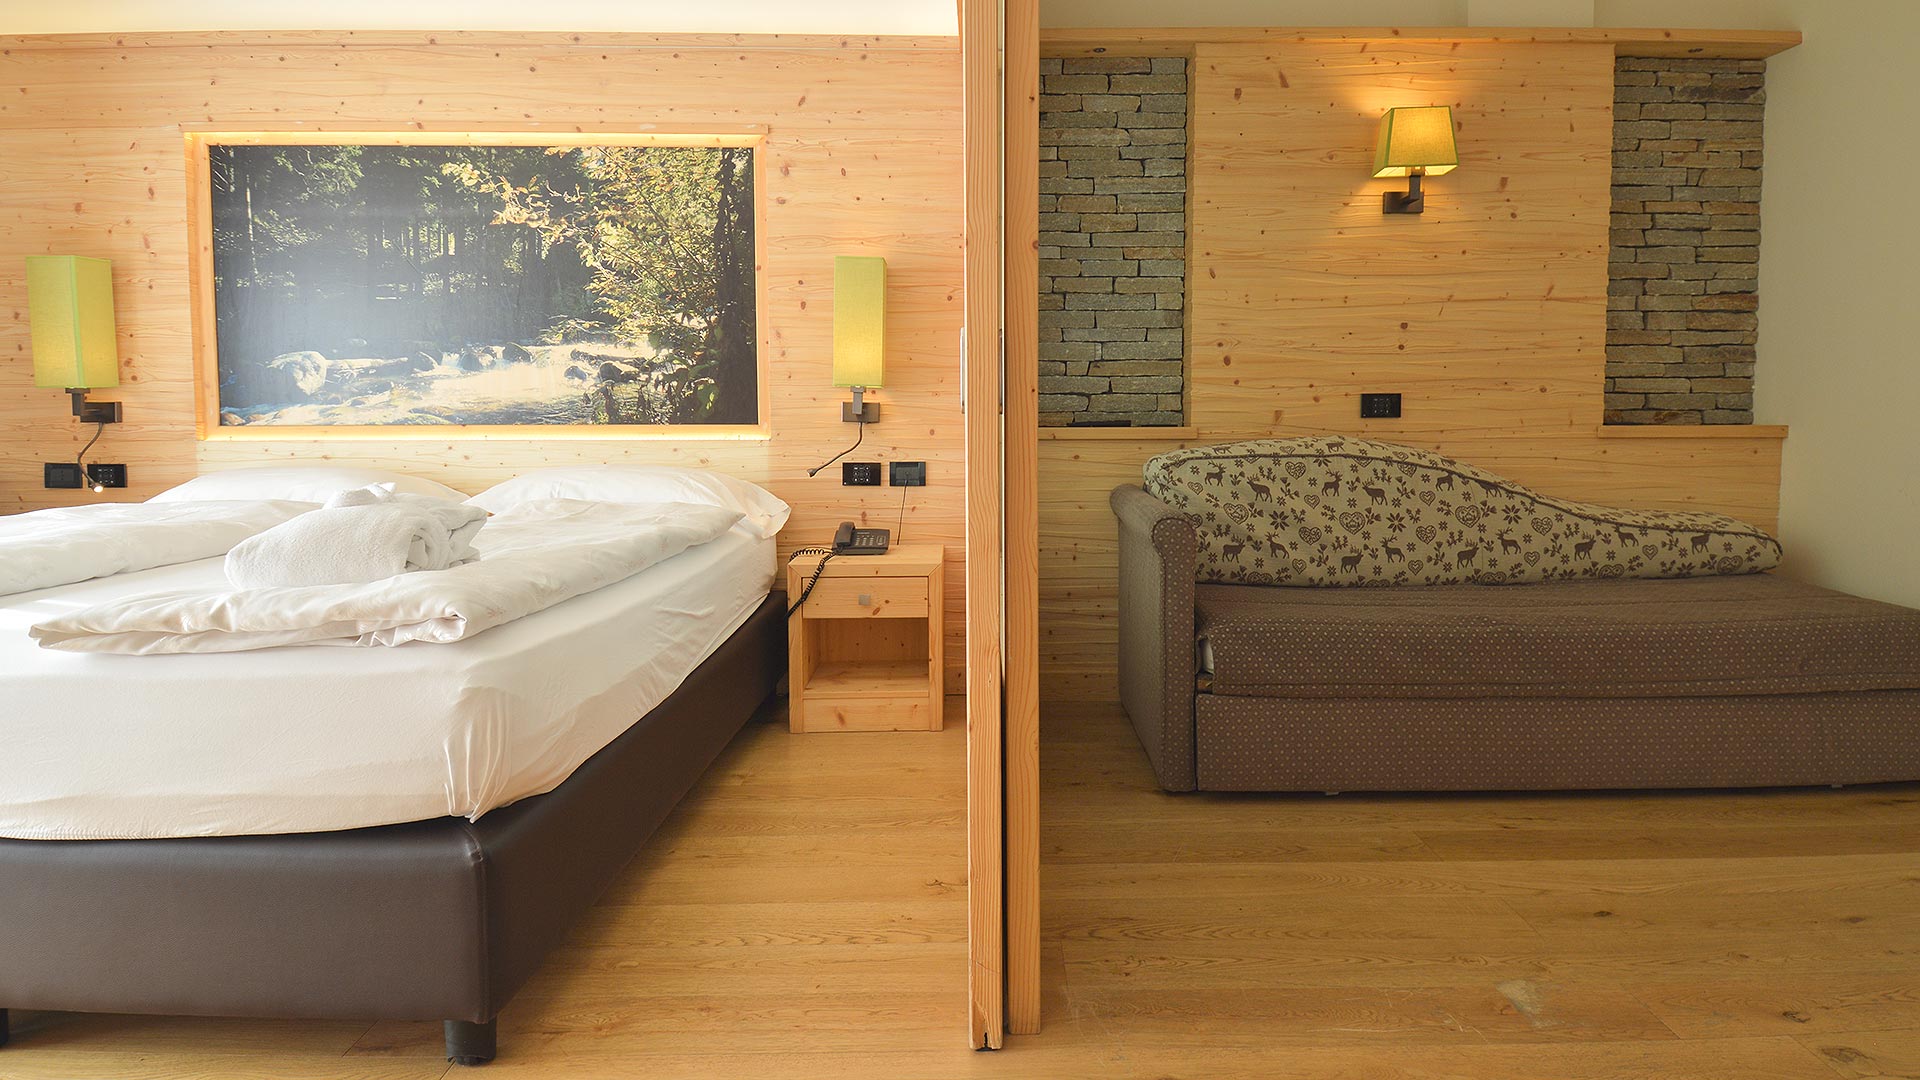 The design-relax combination for a peaceful and comfortable sleep in our Family Hotel in Dimaro, Val di Sole.